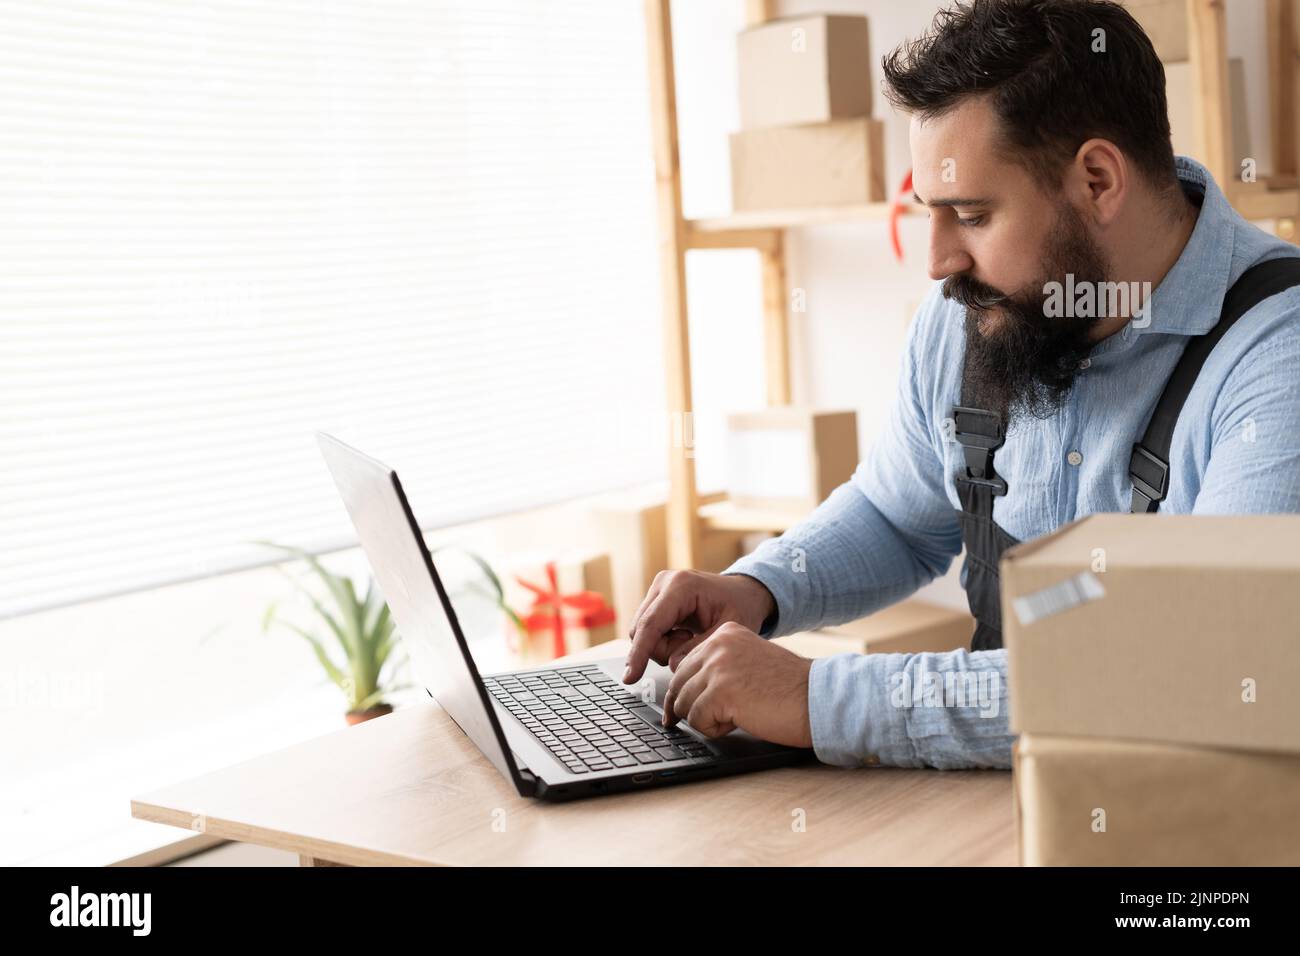 Indian entrepreneurs small business SME independent men work at home Use laptops for commercial checking, online marketing, packing boxes, SME sellers Stock Photo